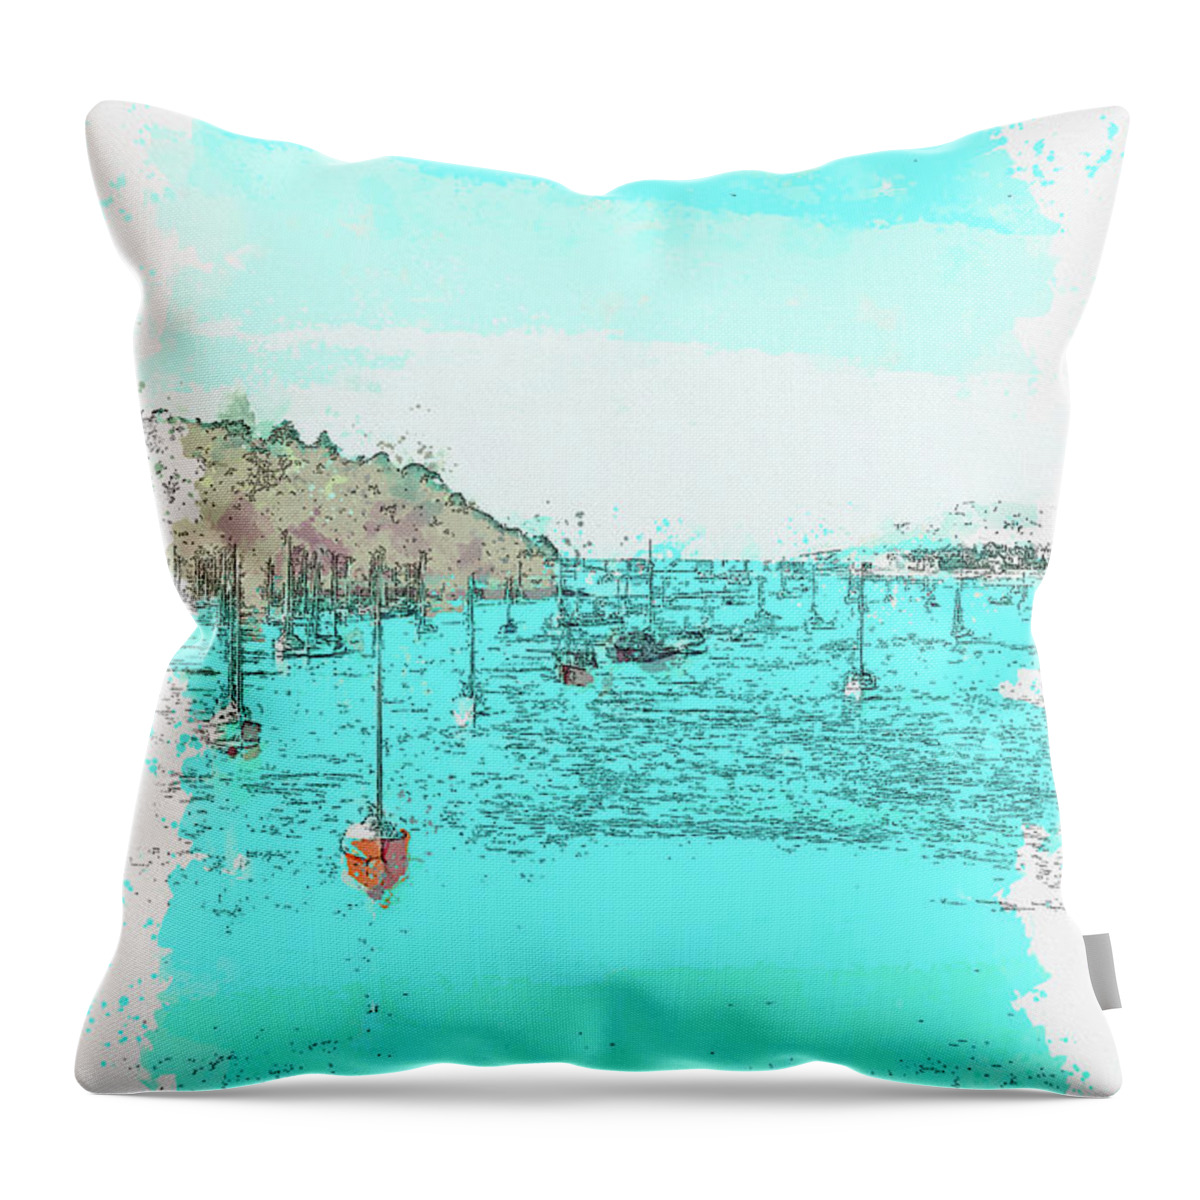 Boats Floating On Bay Watercolor Throw Pillow featuring the painting Boats Floating on Bay by Celestial Images